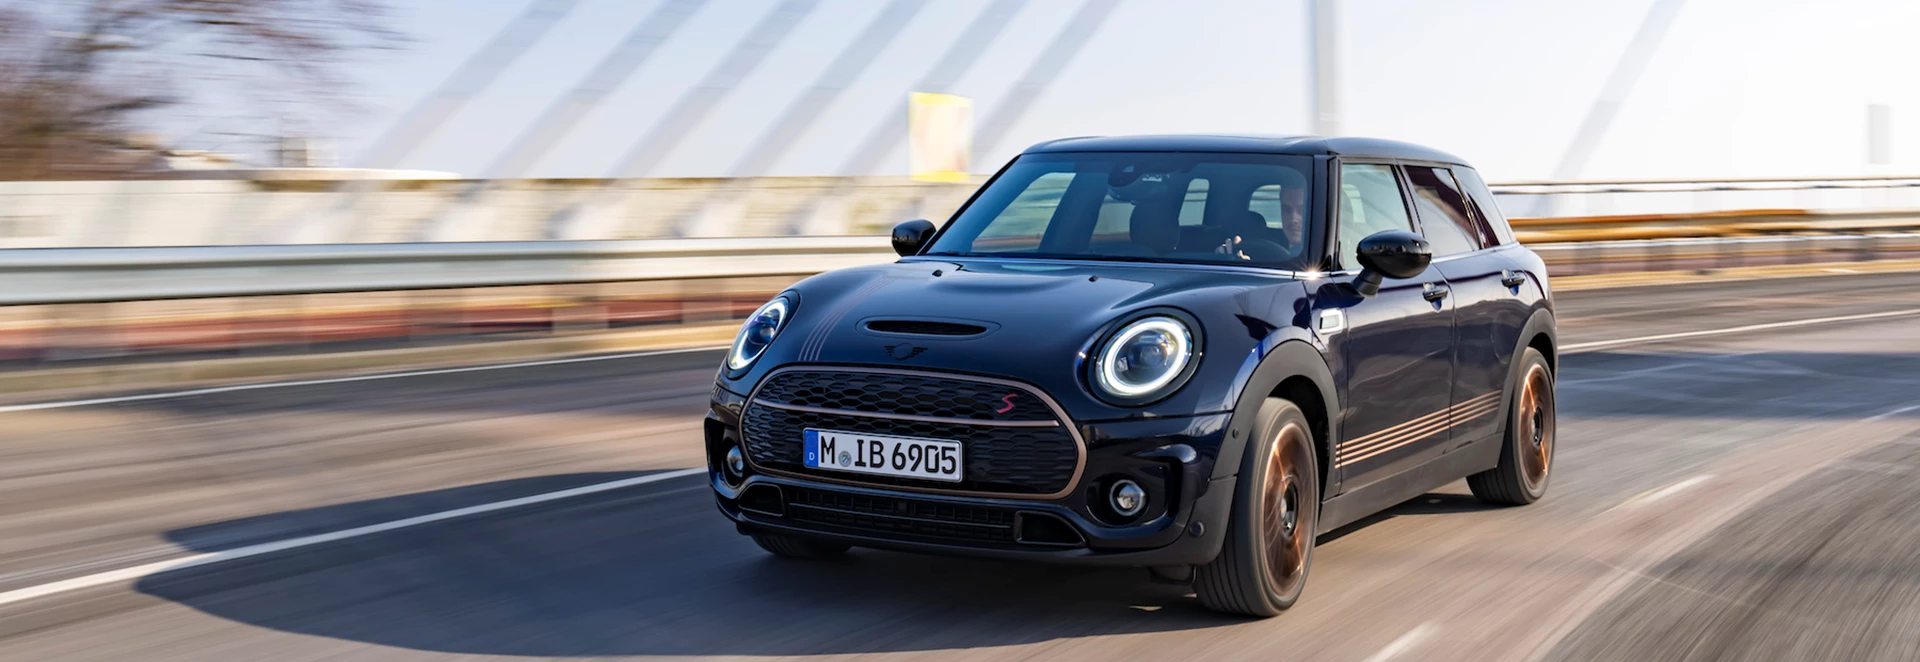 Mini Clubman Final Edition: Here’s what you need to know 